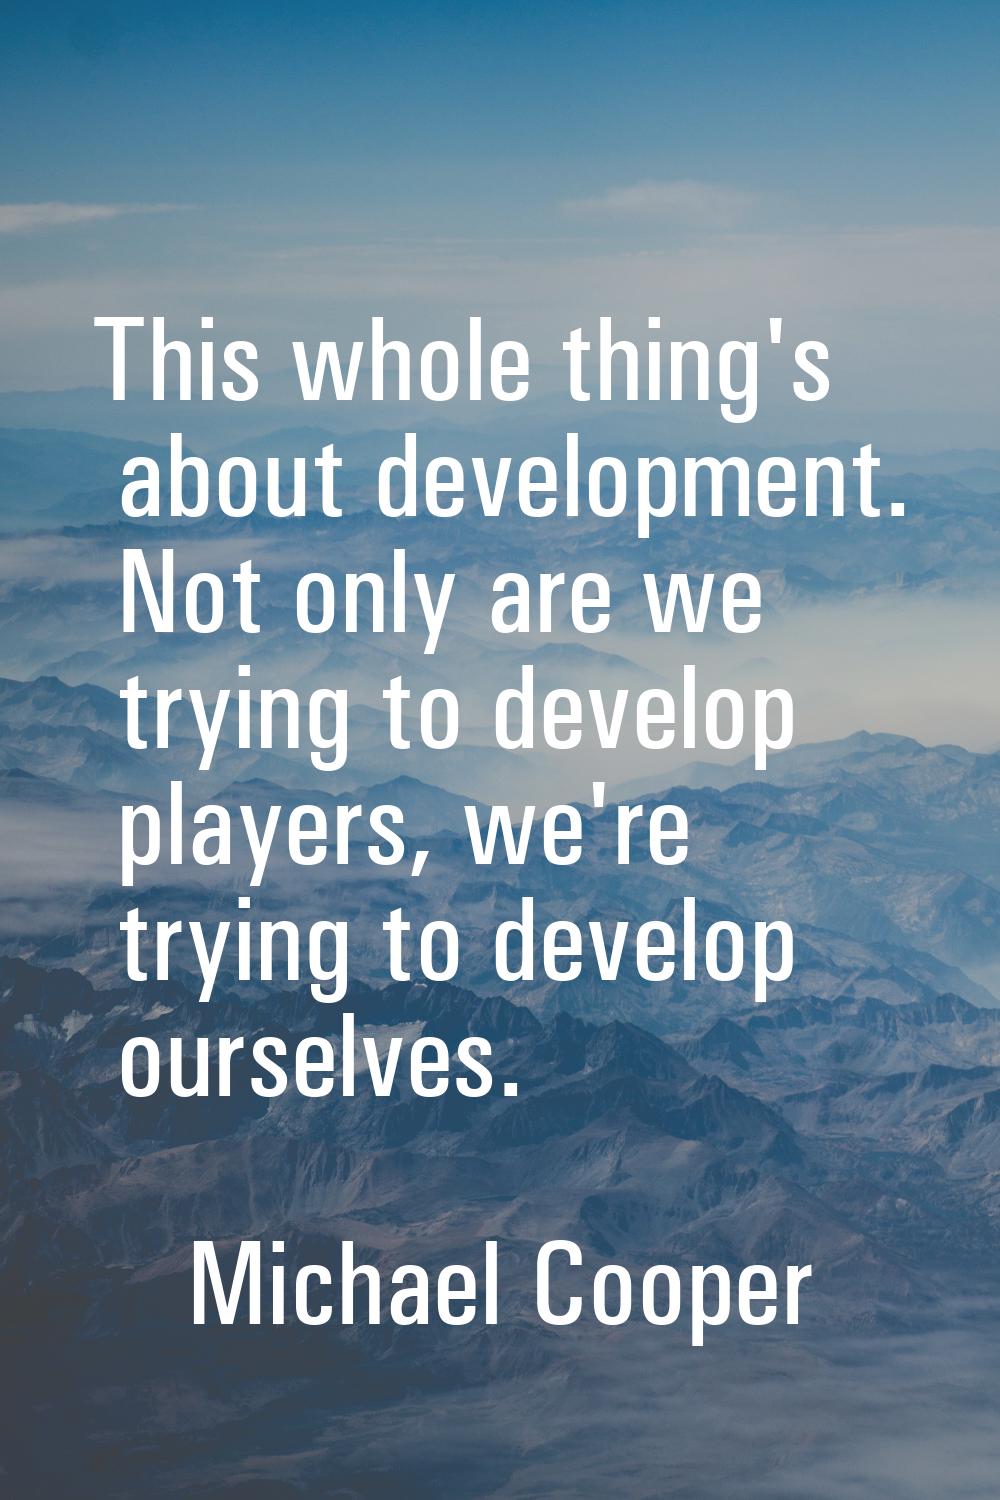 This whole thing's about development. Not only are we trying to develop players, we're trying to de